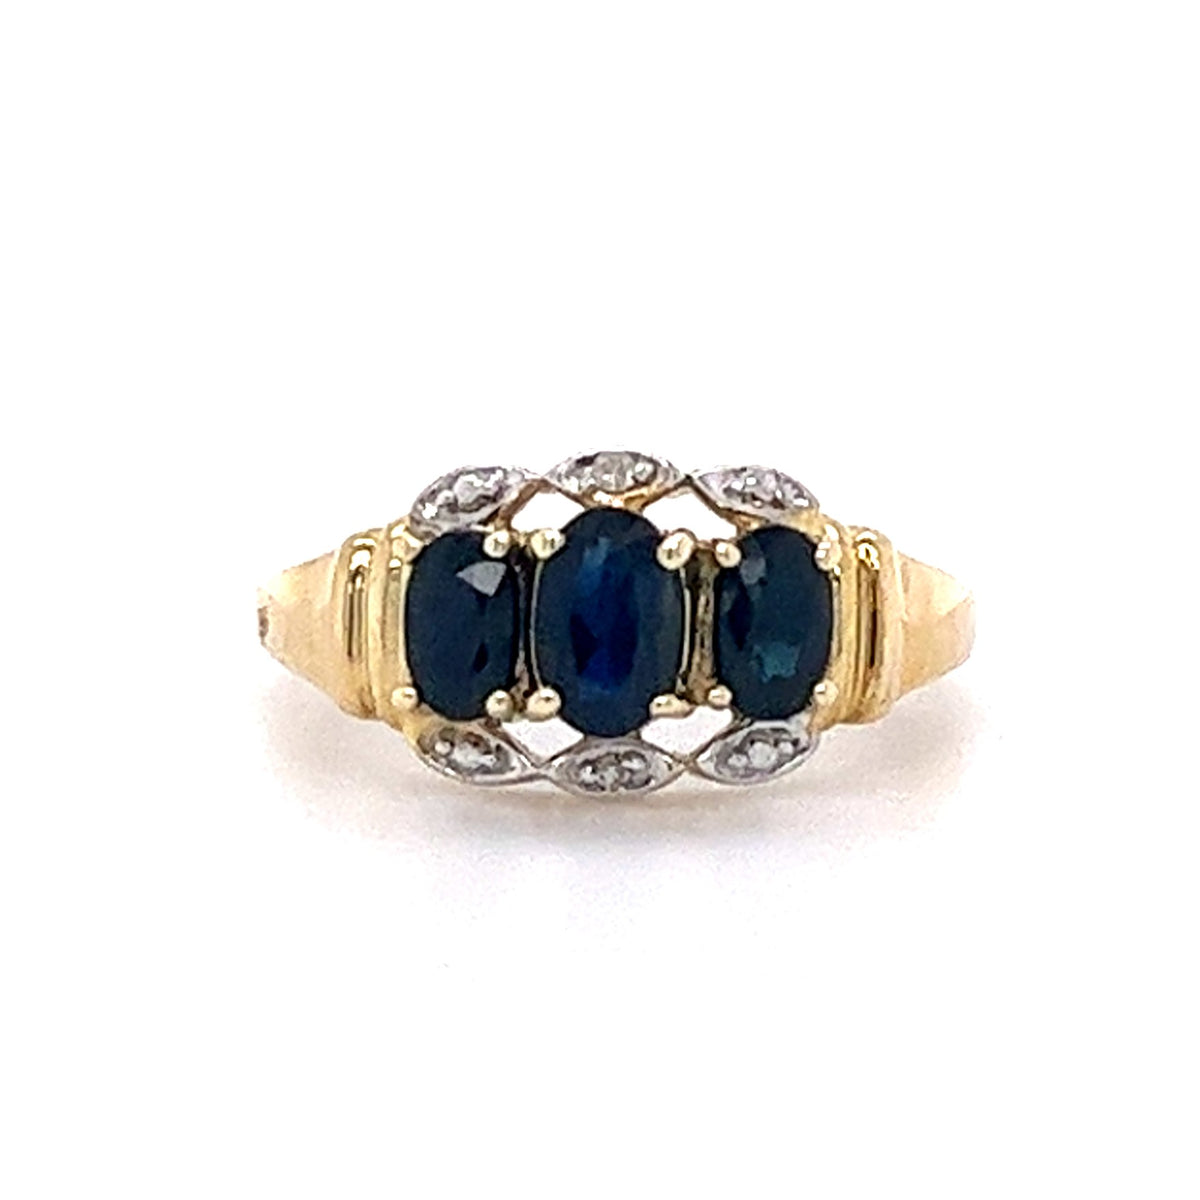 10KT YELLOW GOLD DIAMOND AND SAPPHIRE LADIES RING